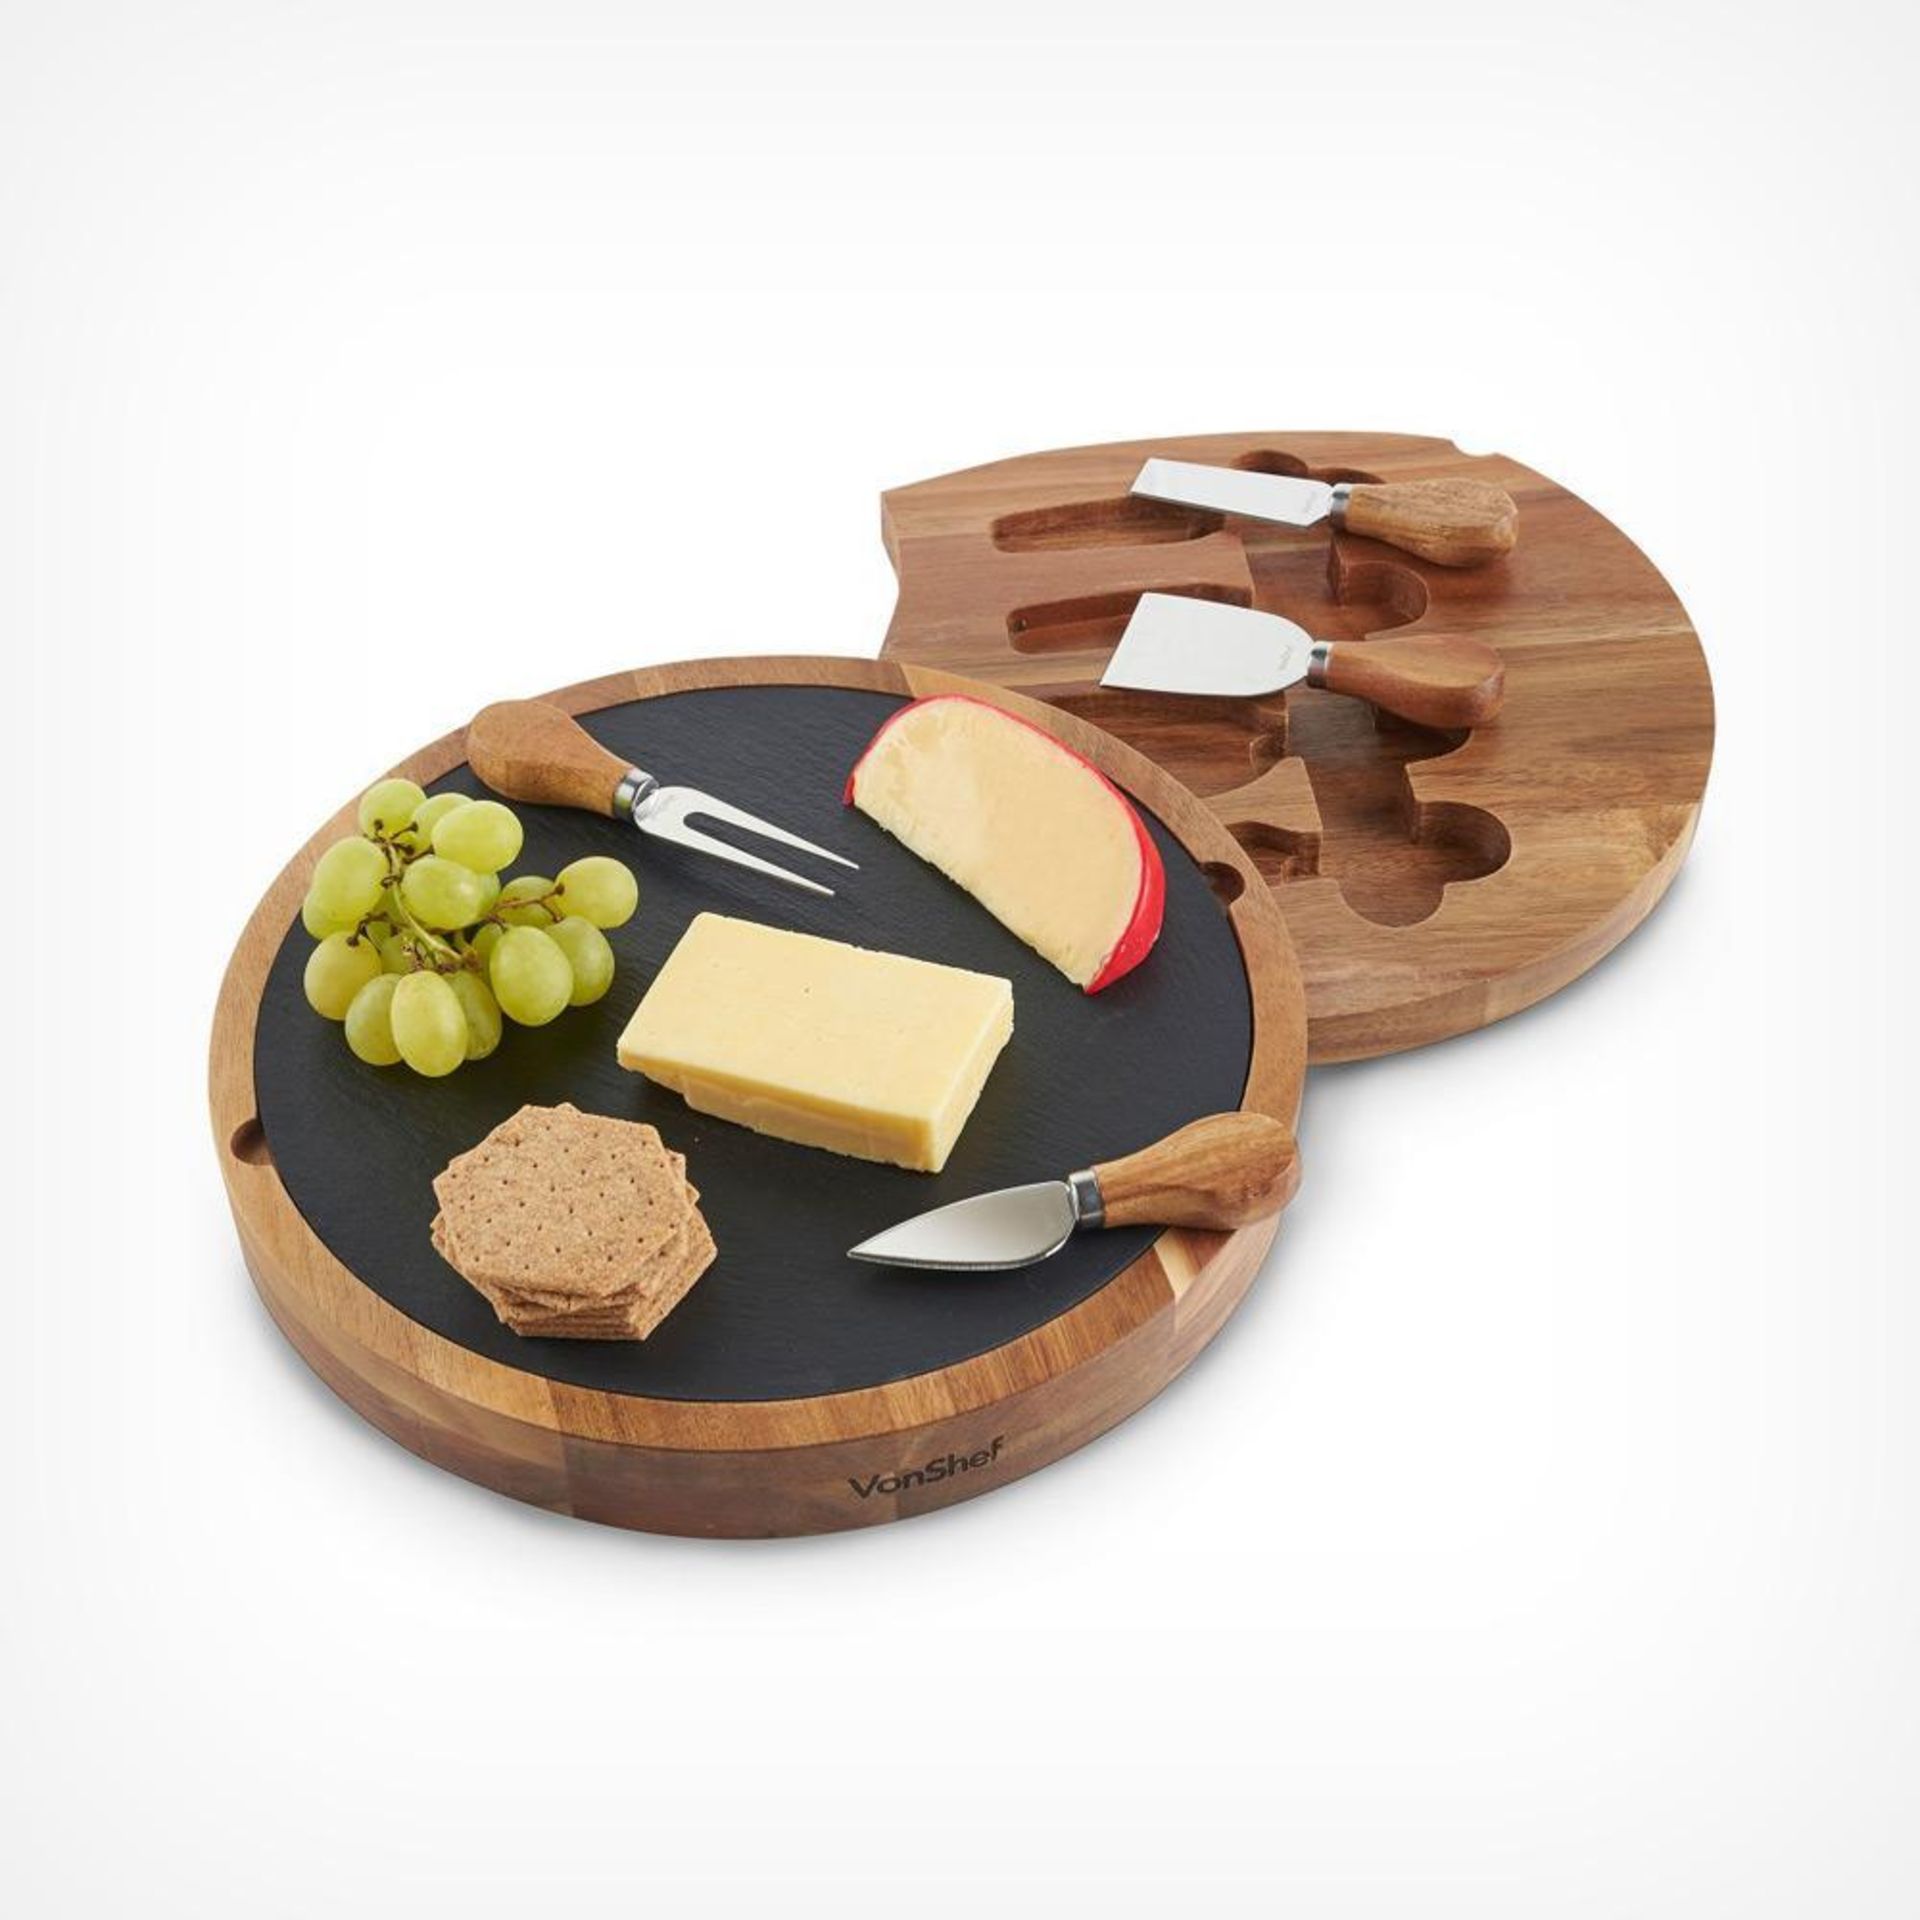 Round Cheese Board Knife Set - ER50. Round Cheese Board & Knife SetAdd contemporary style to your